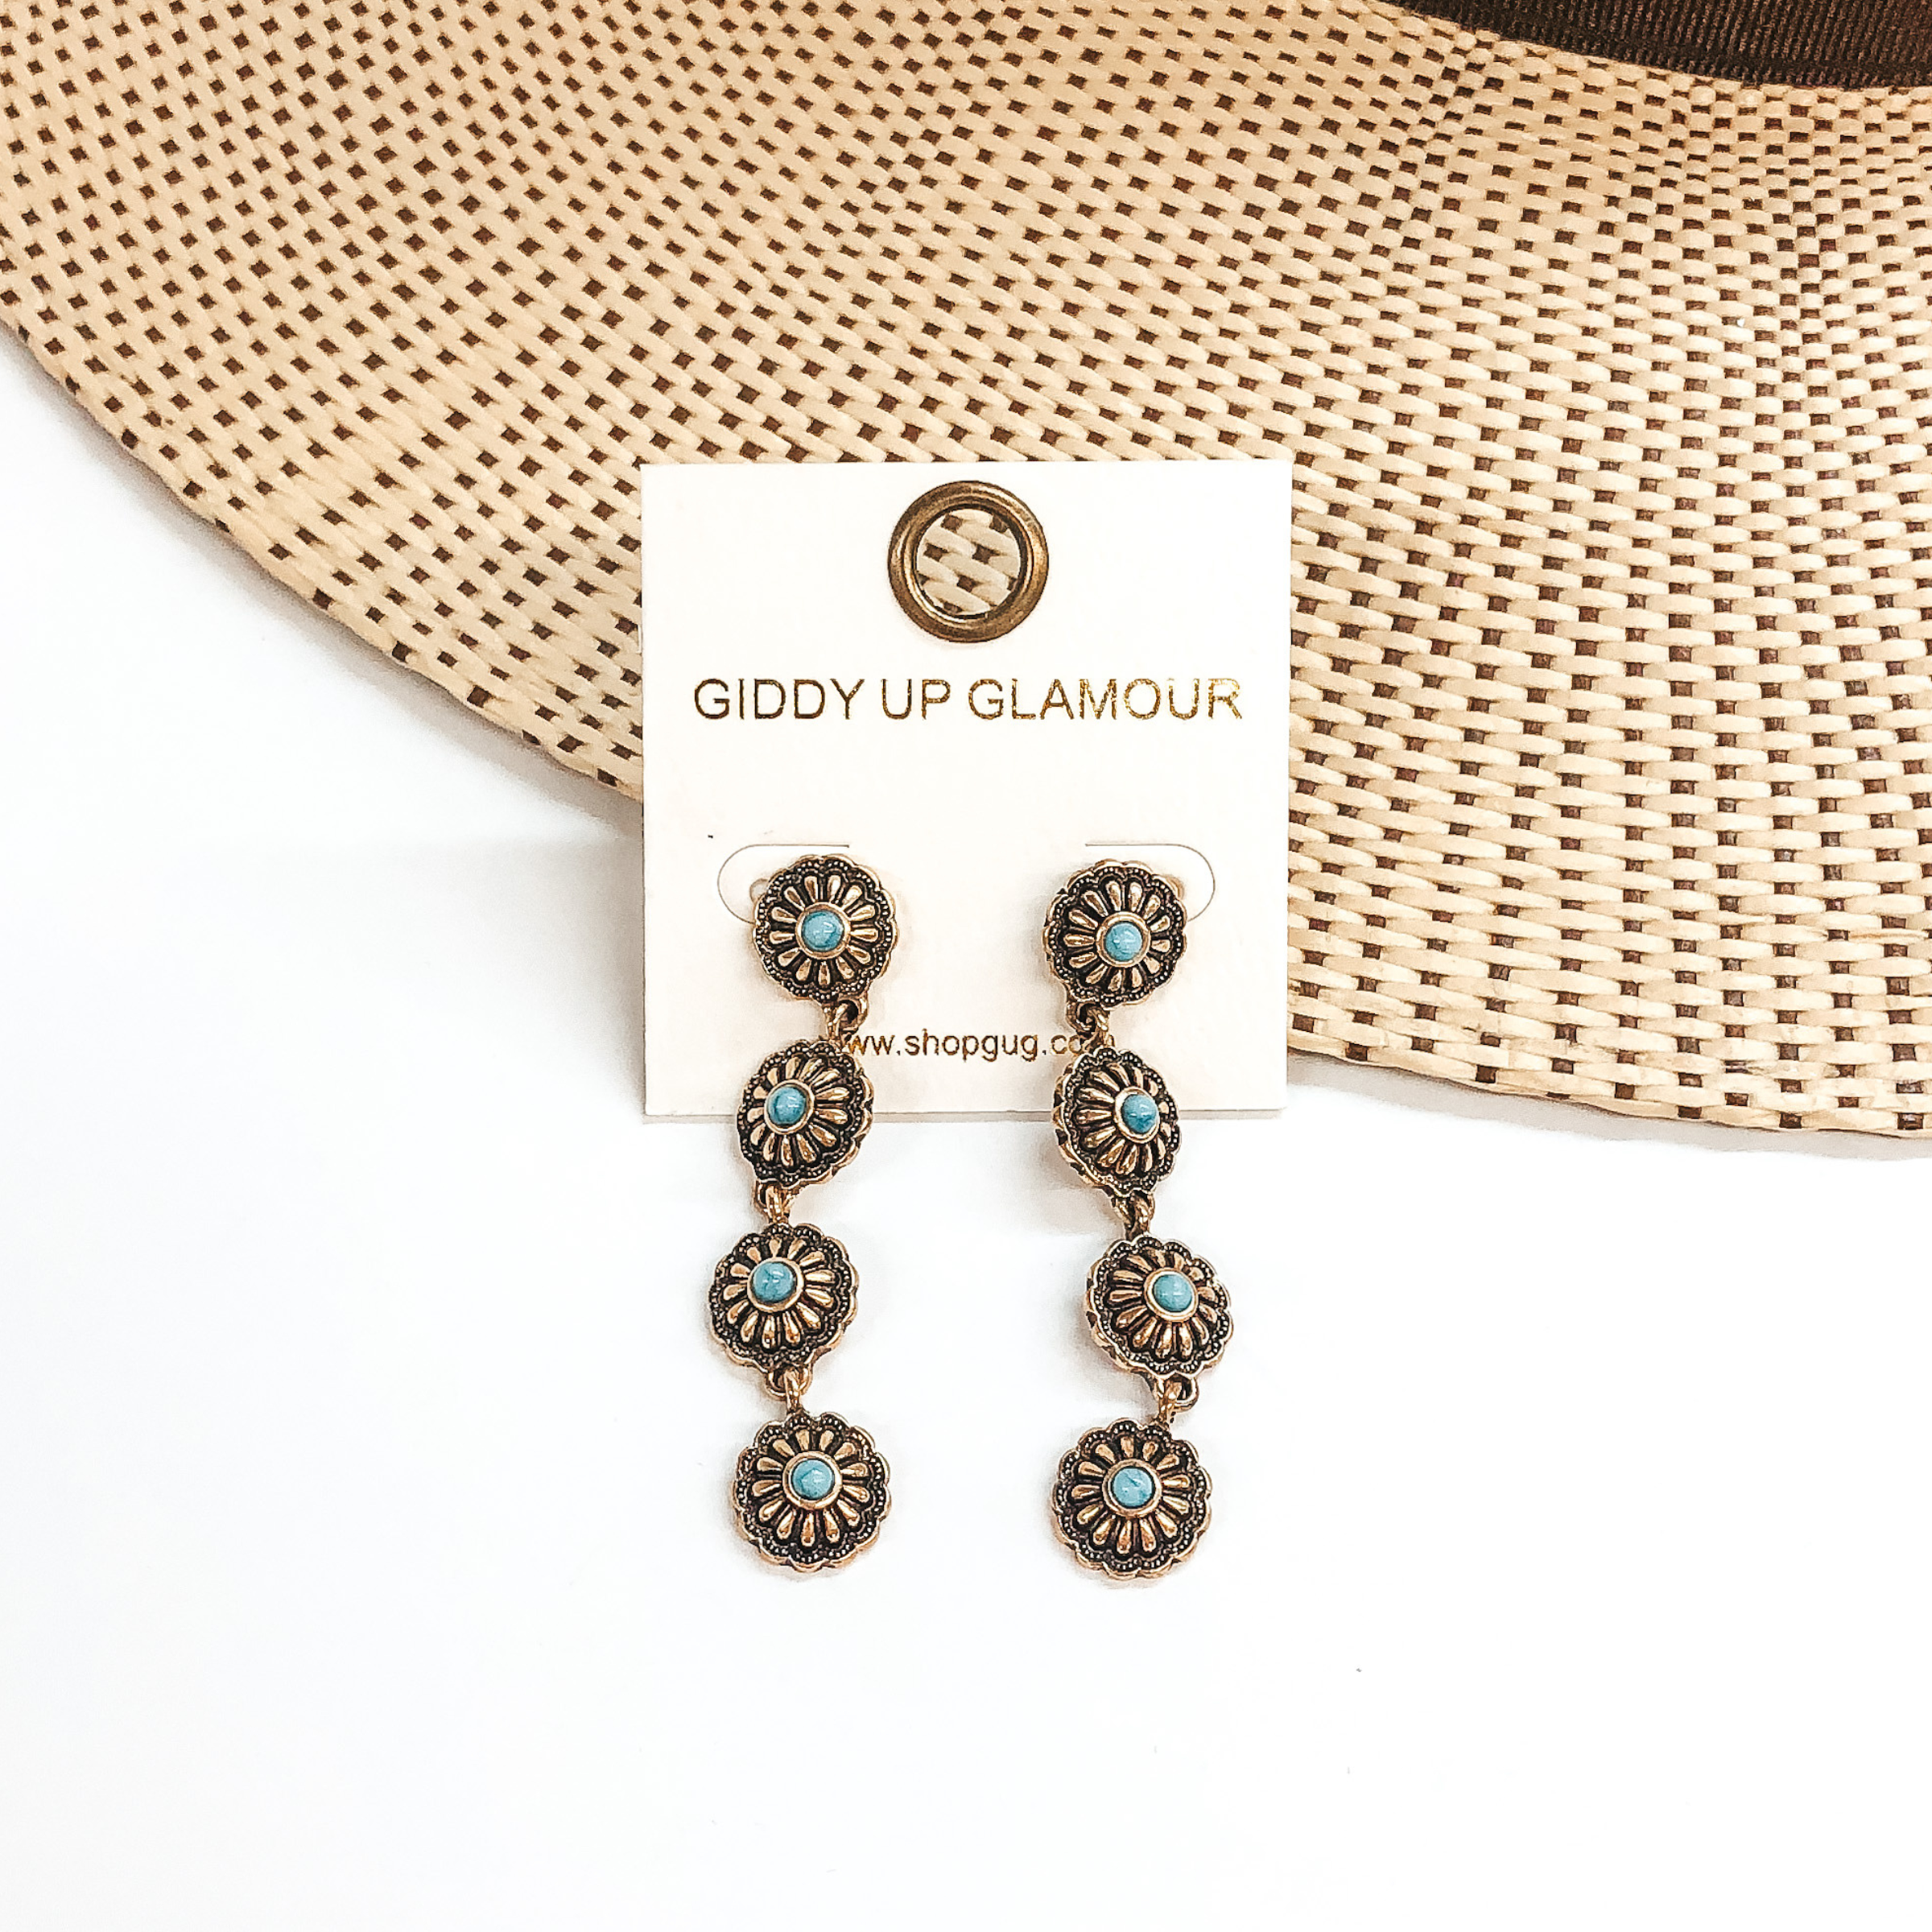 Four small, gold conchos in a row to form a dangle earrings. Each concho has a small turquoise stone in the center. These earrings are pictured on a white and tan background.